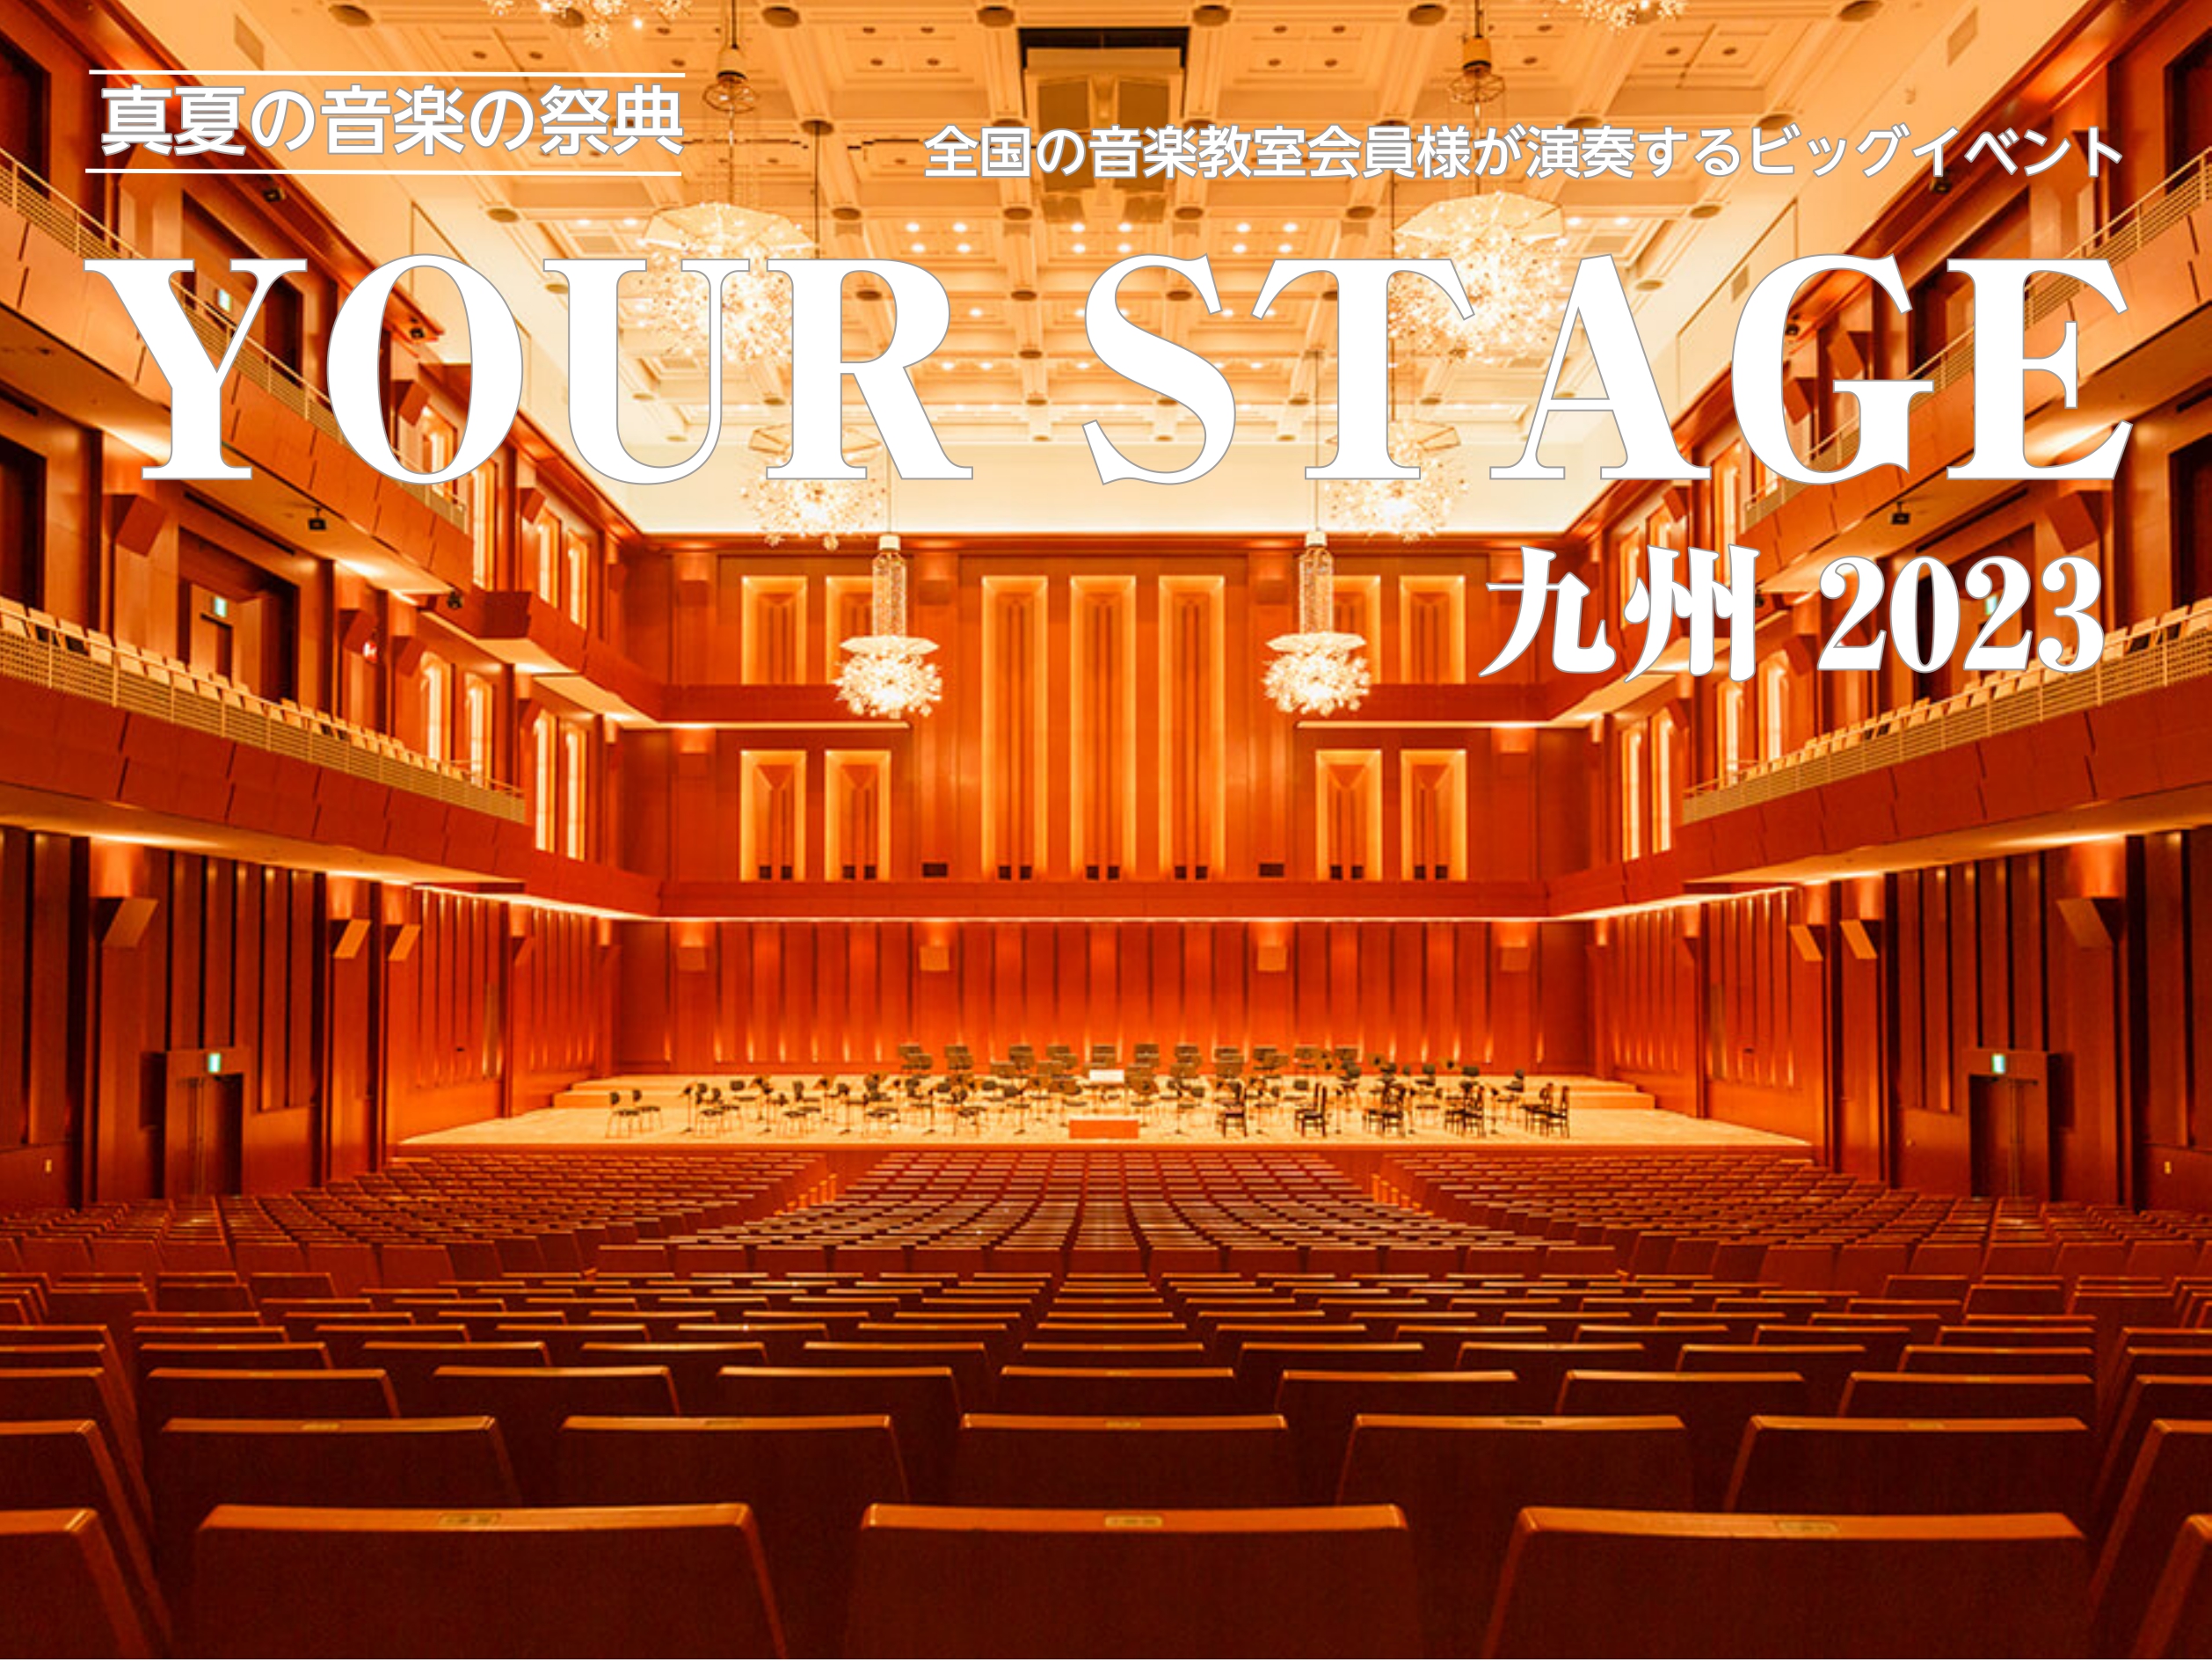 CONTENTSYOUR STAGE とは多彩な公演プログラム九州会場のご案内チケットの購入YOUR STAGE とは 真夏の音楽の祭典「YOUR STAGE」。全国の音楽教室生徒様による演奏会です。全国の島村楽器の店舗からご応募いただいた総勢900名以上の音楽教室会員様が、全8日間22公演にわたり […]